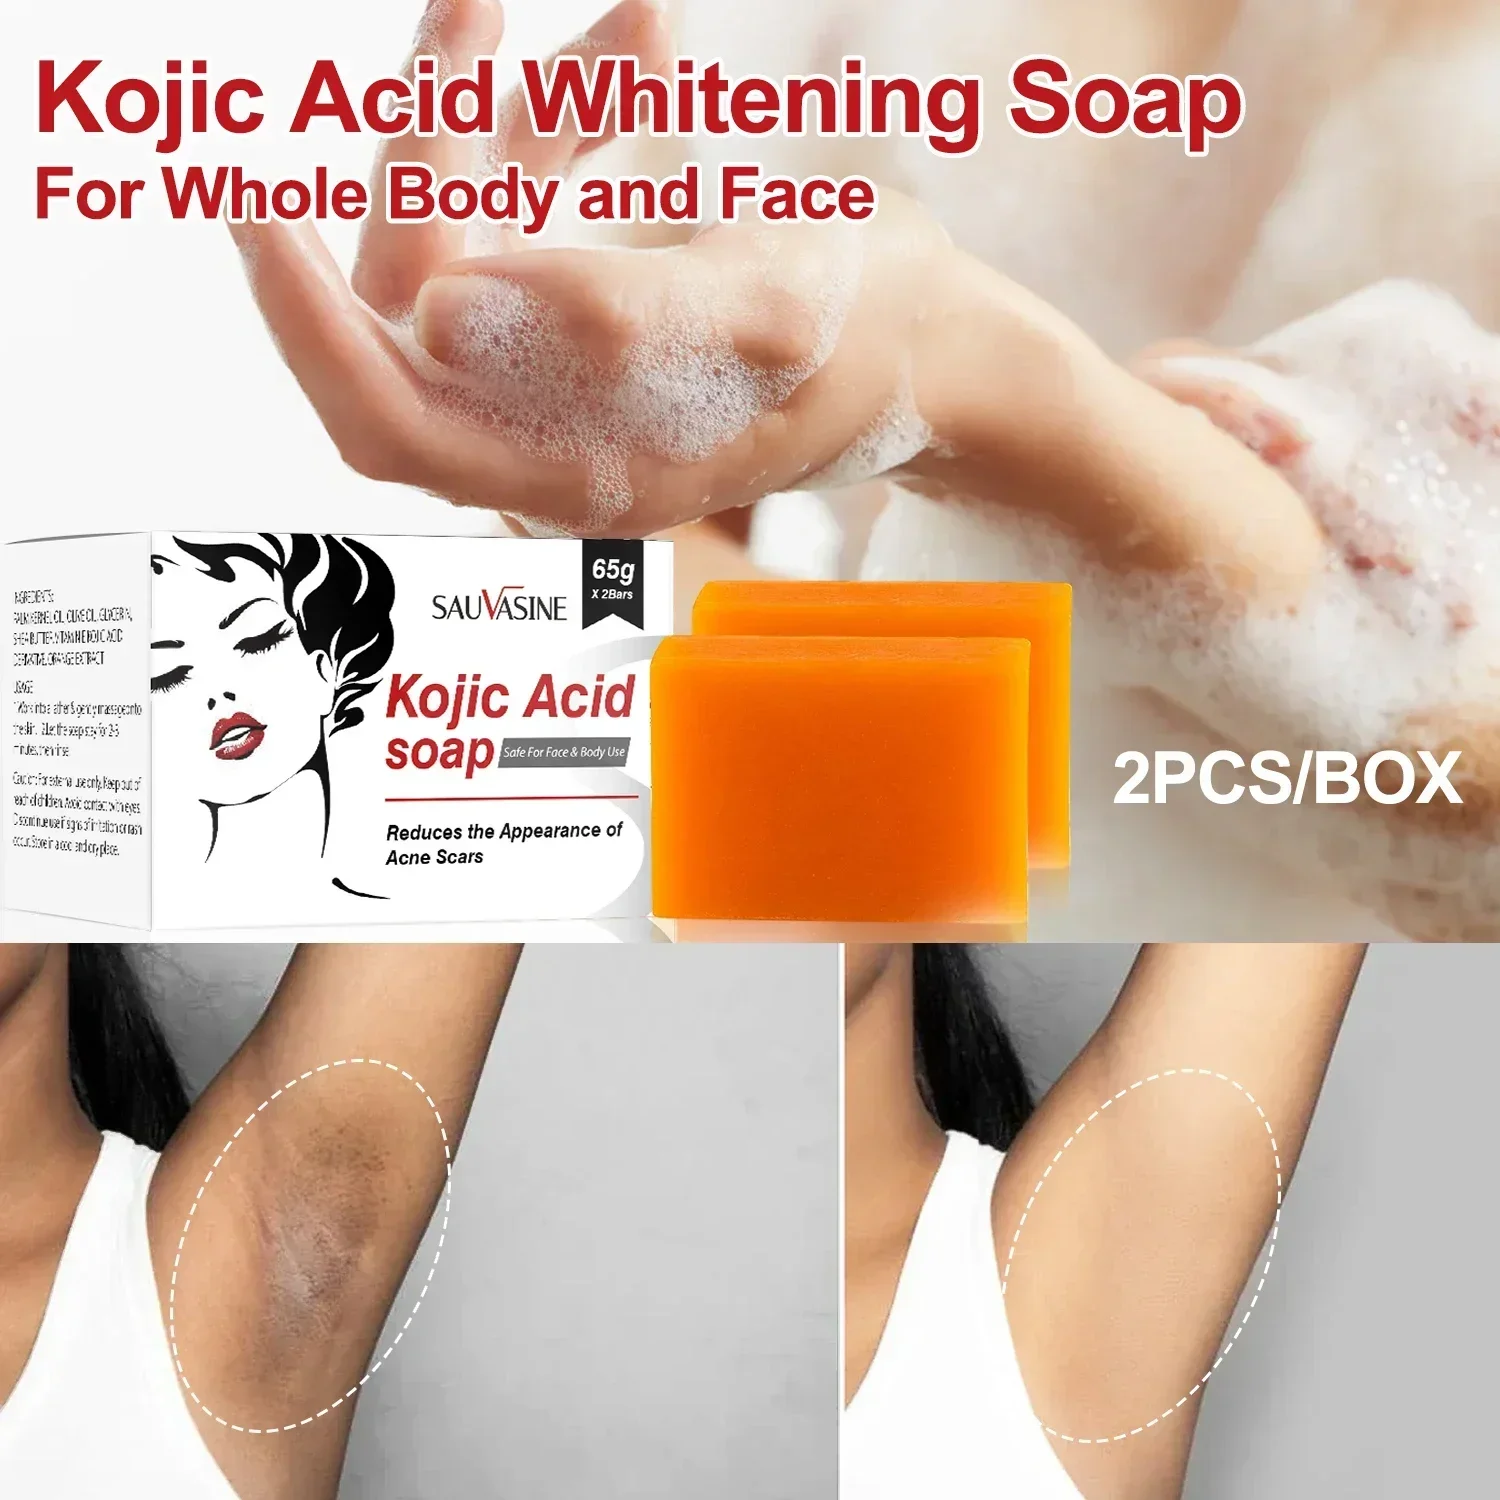 

Kojic Acid Soap Soap in Sheets Cleansing Face Even Skin Tone Whitening Soap Oil Control Moisturizing Beauty Health Skin Care